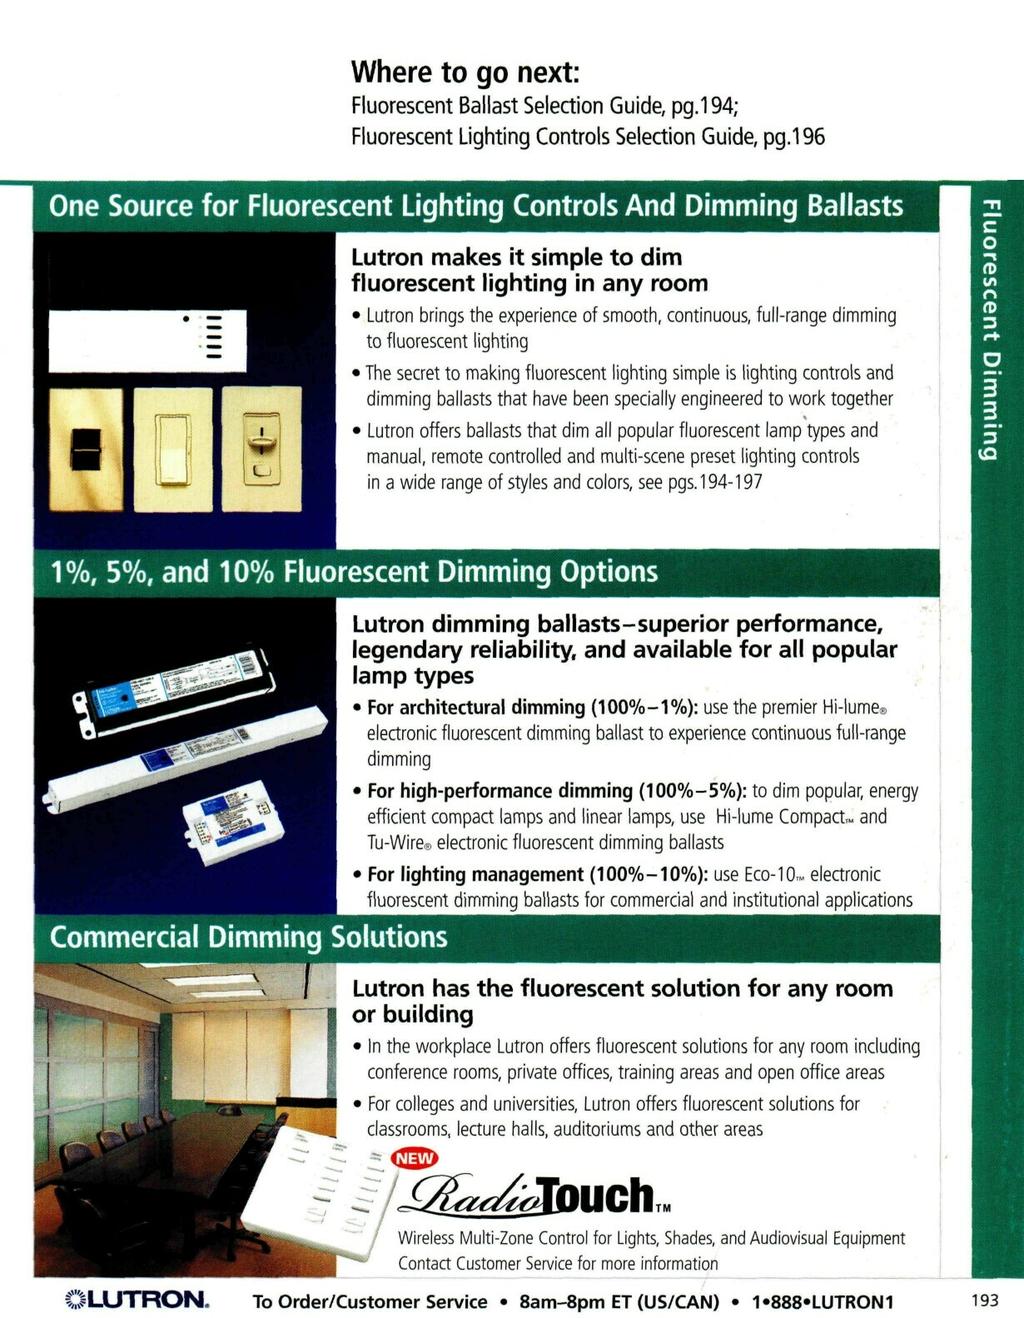 Where to go next: Fluorescent Ballast Selection Guide, pg.94; Fluorescent Lighting Controls Selection Guide, pg.